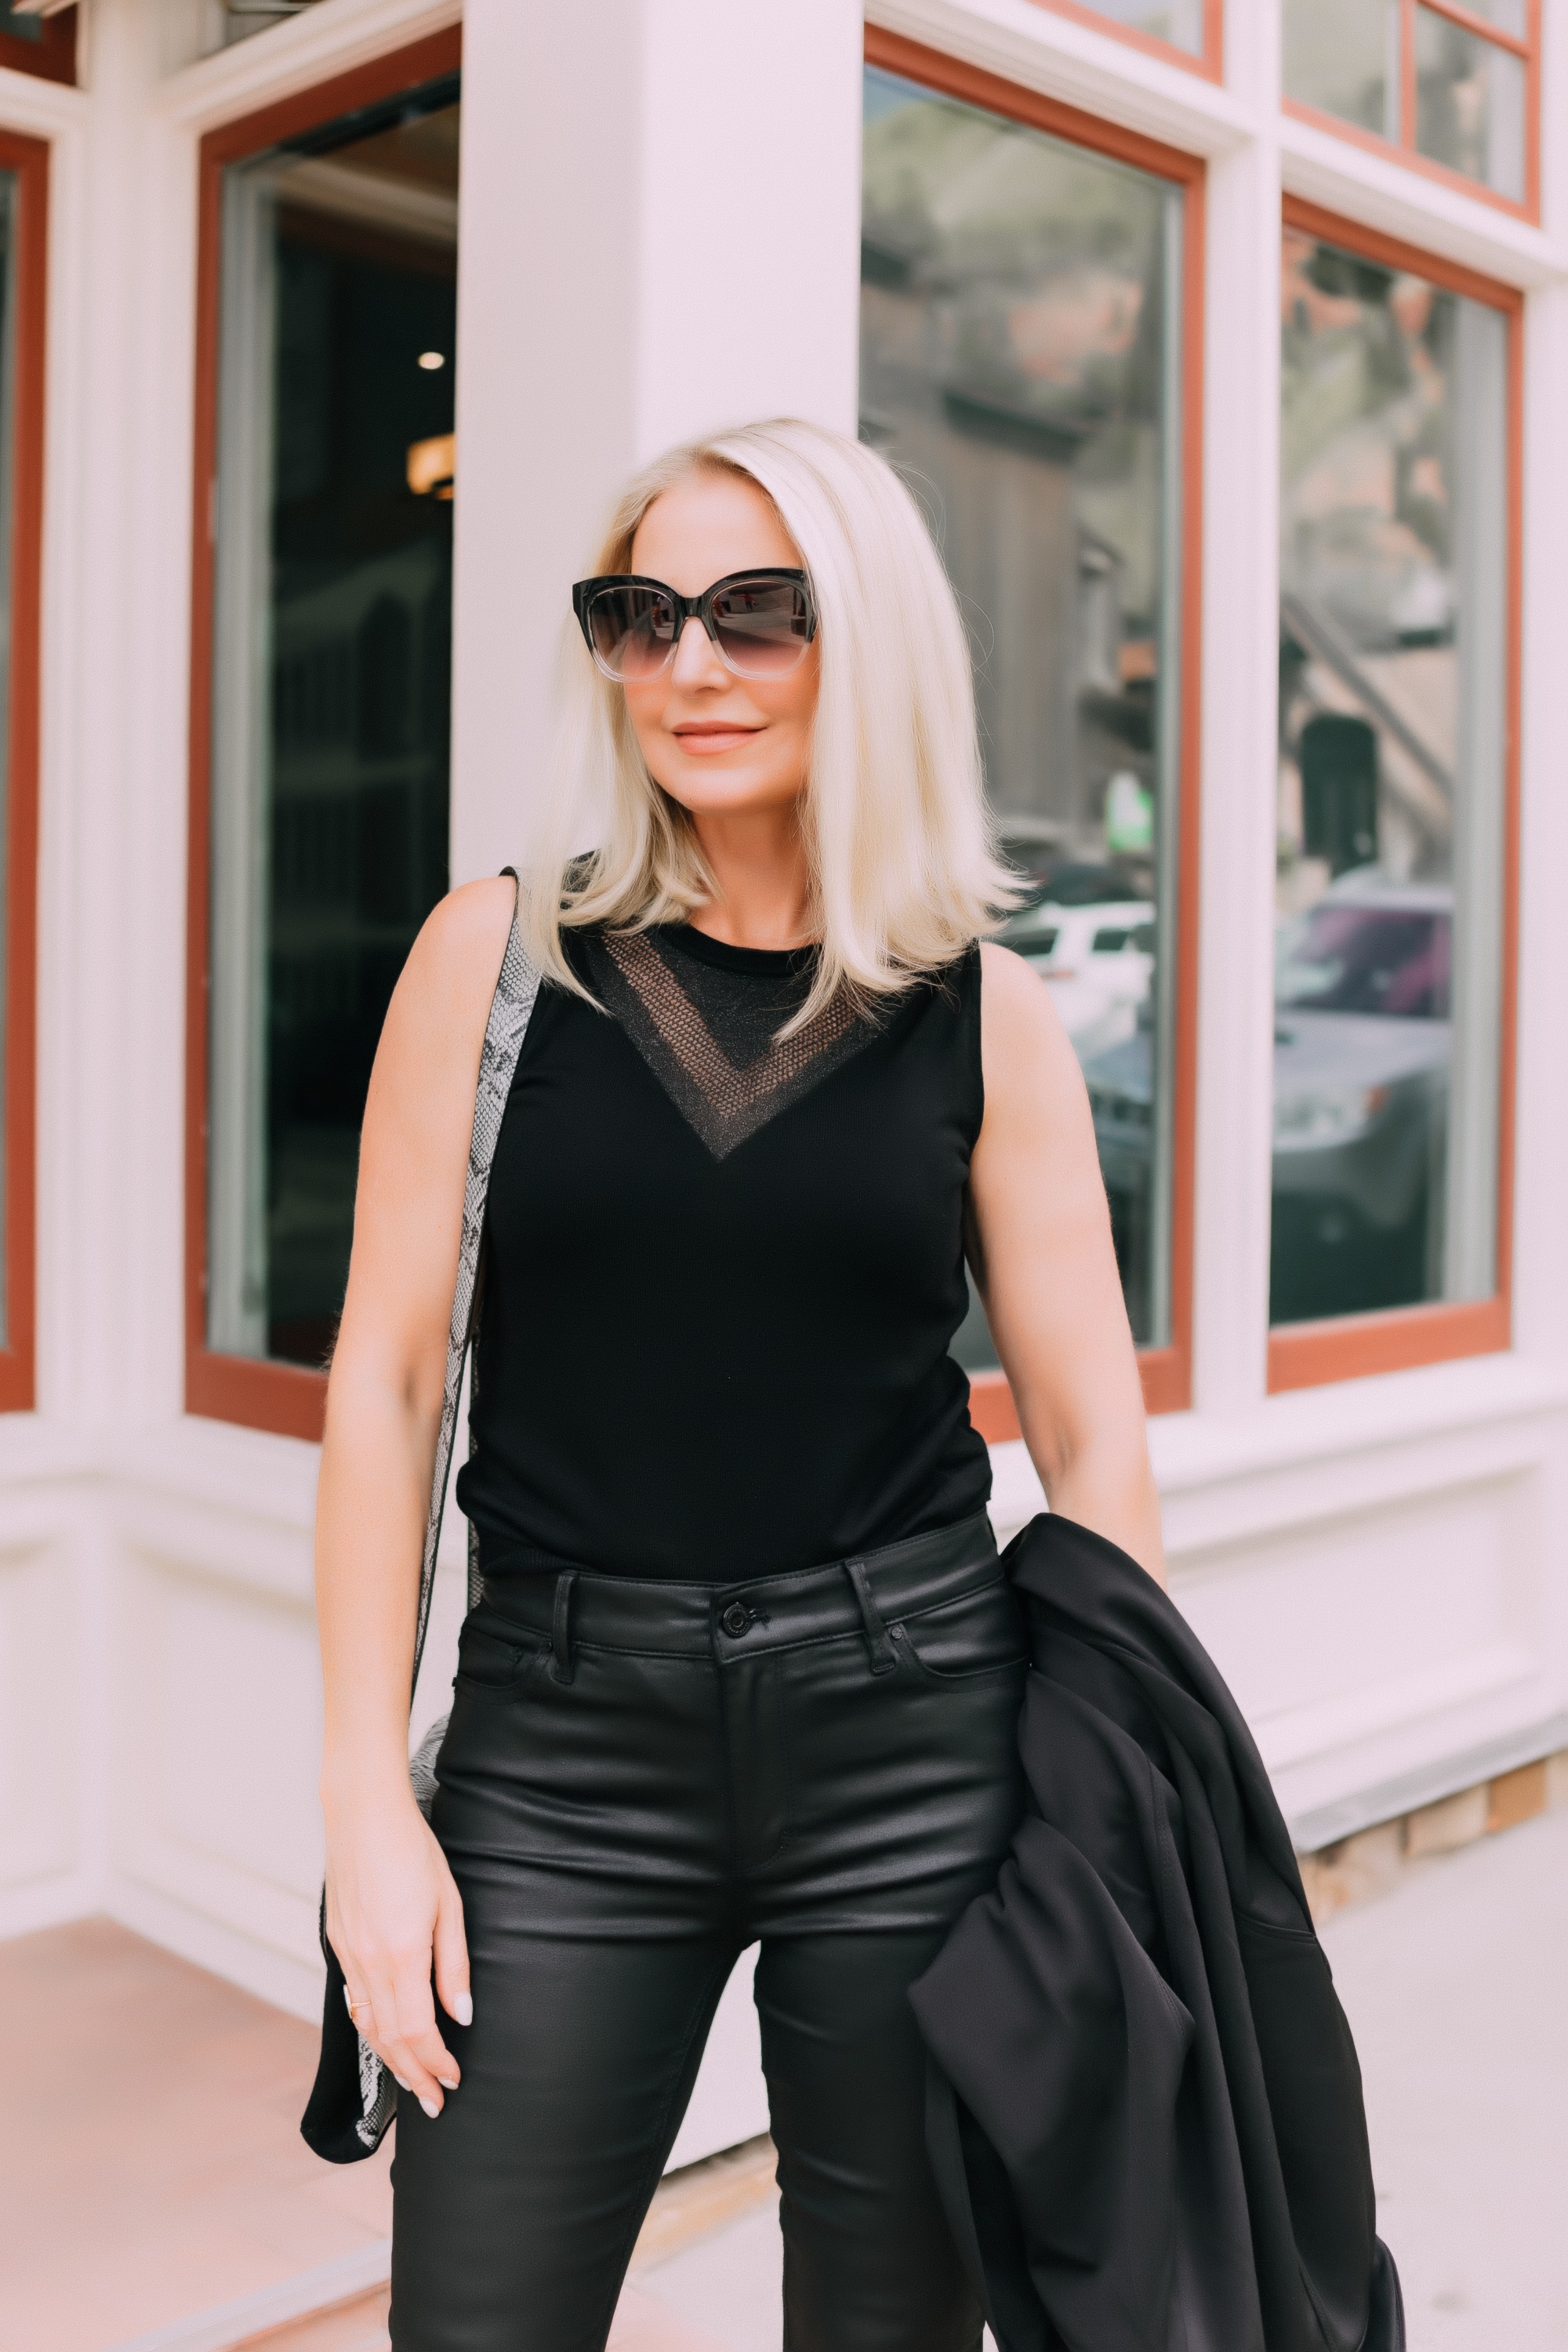 Coated Jeans, Fashion blogger Erin Busbee of BusbeeStyle.com wearing a head to toe all-black look by White House Black Market including coated jeans, python accented bag and heels, sleeveless sweater, and black blazer in Telluride, CO